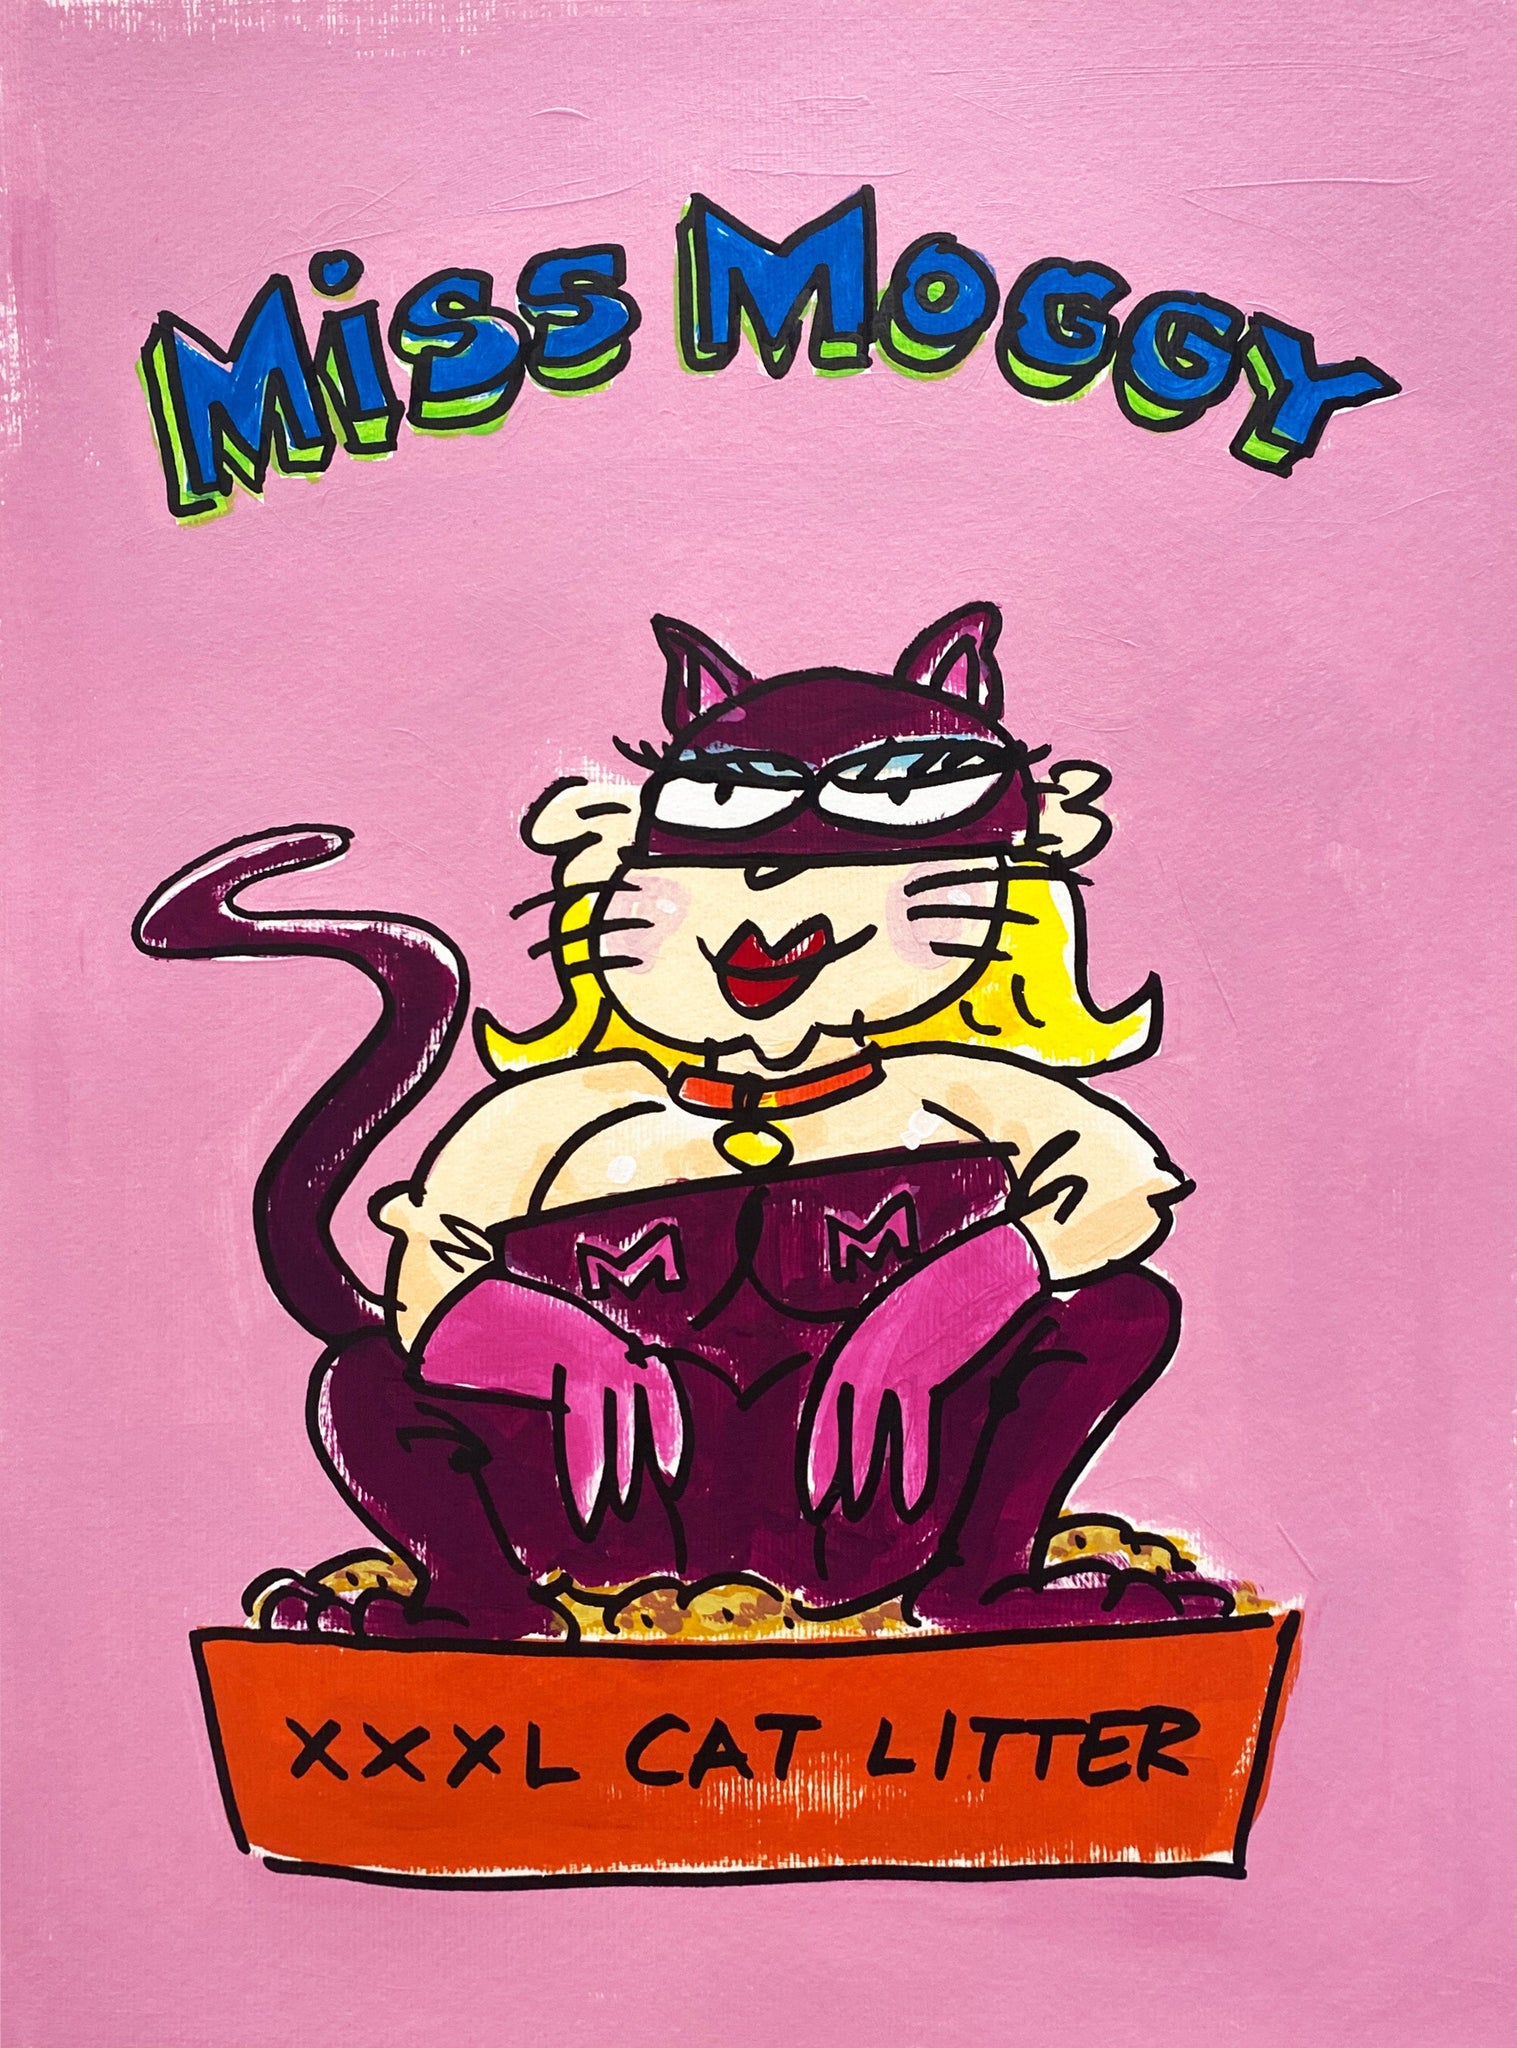 Miss Moggy